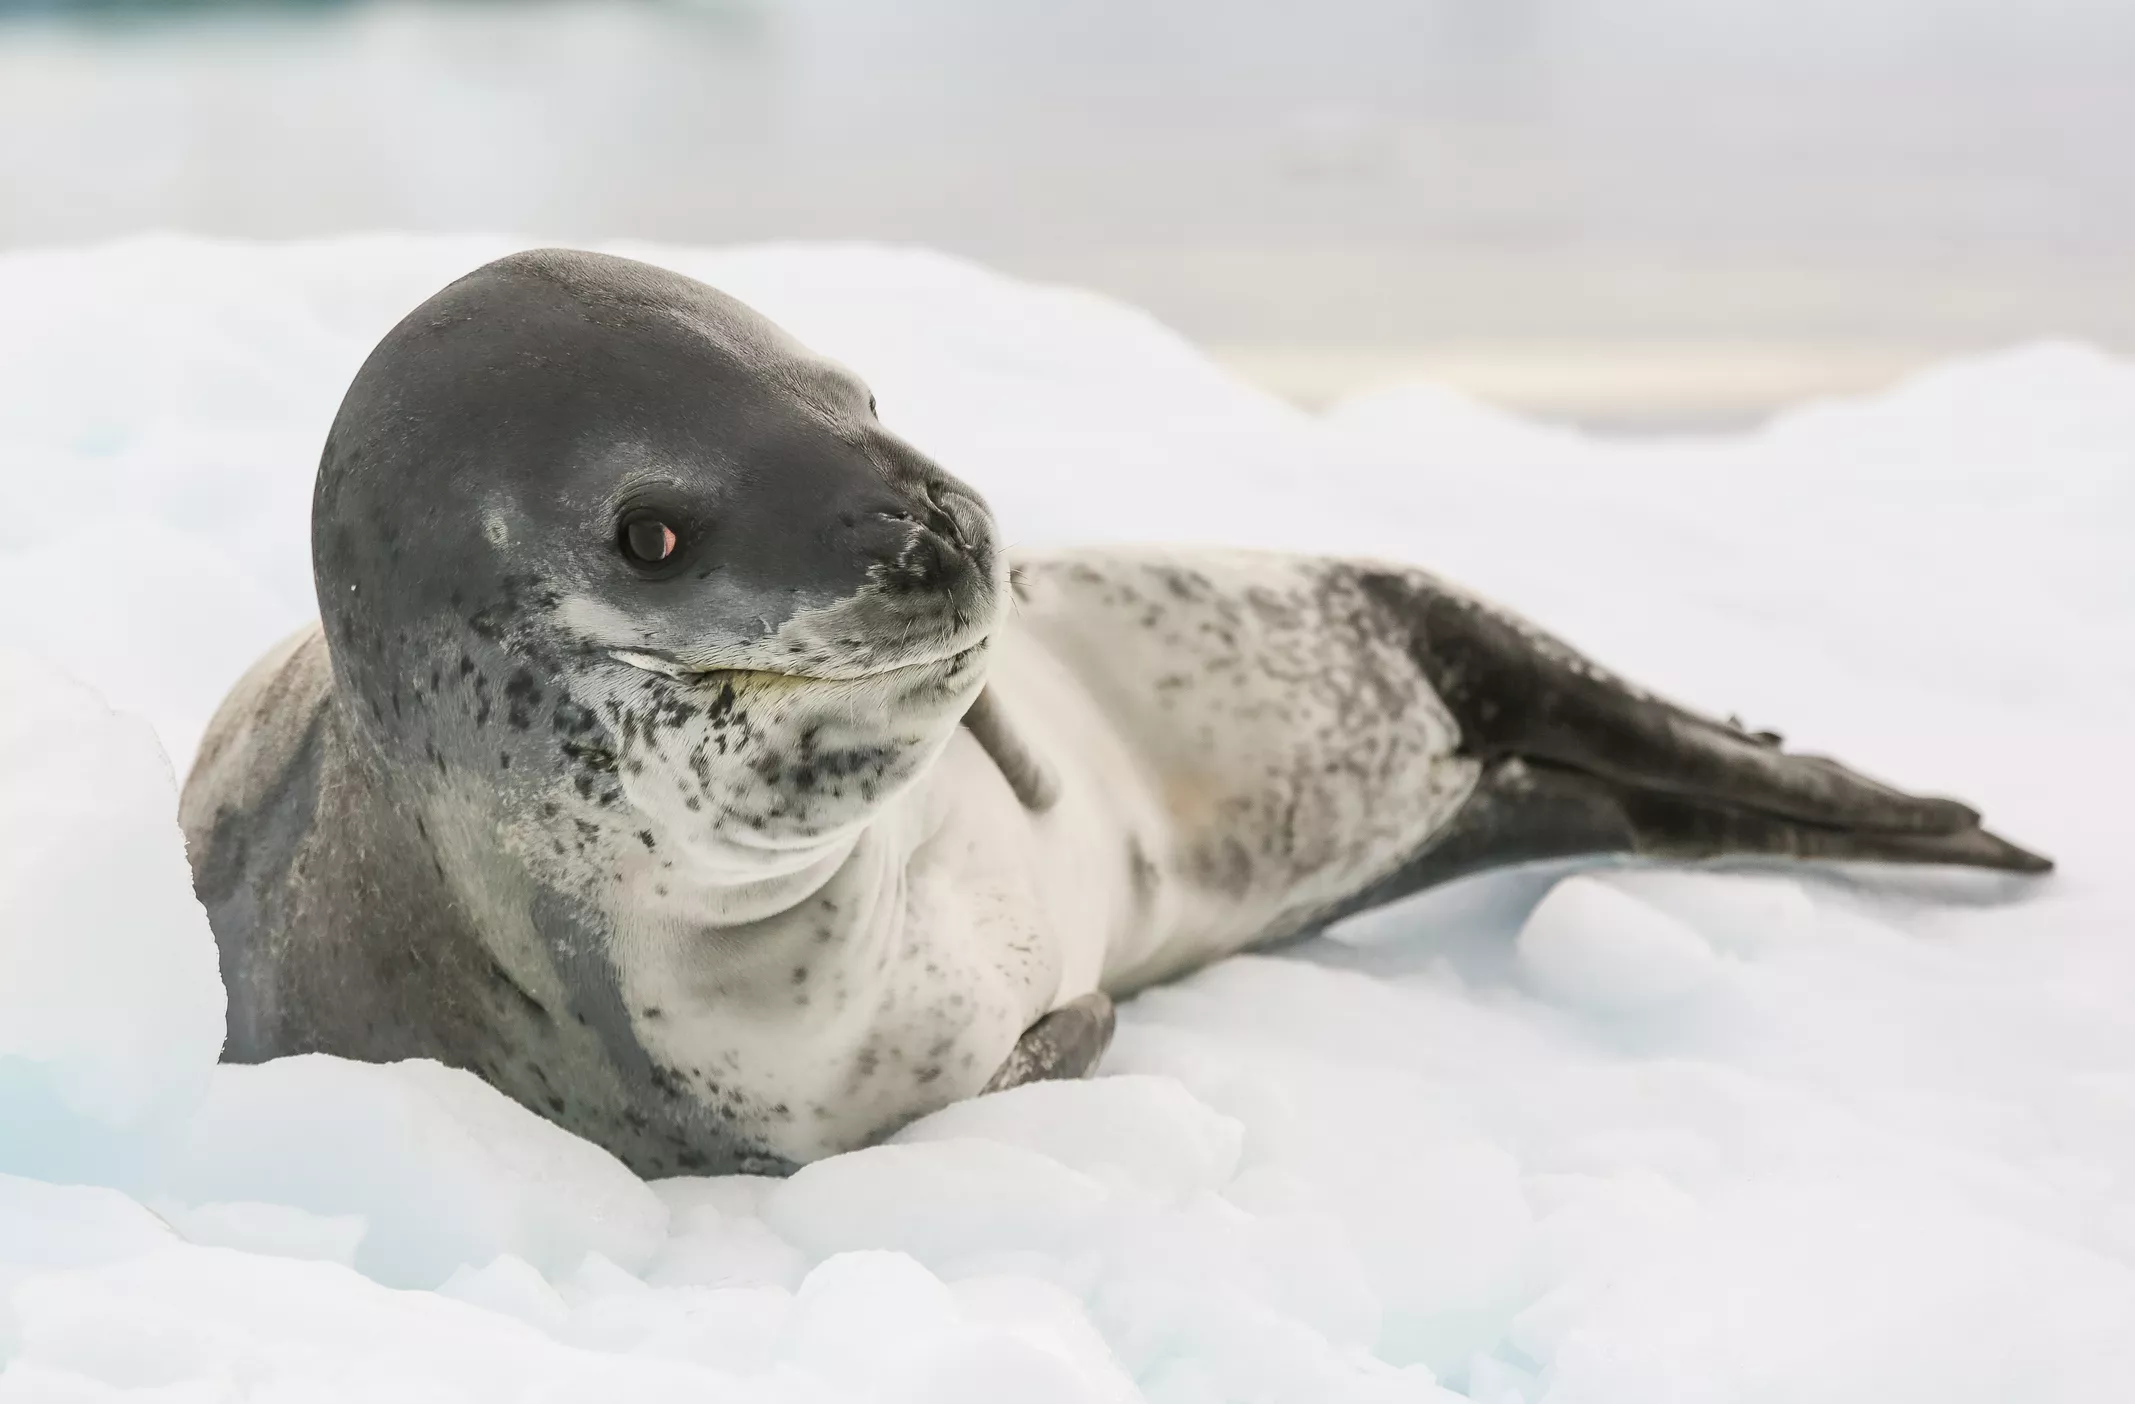 Leopard seal lying on ice with water in background.